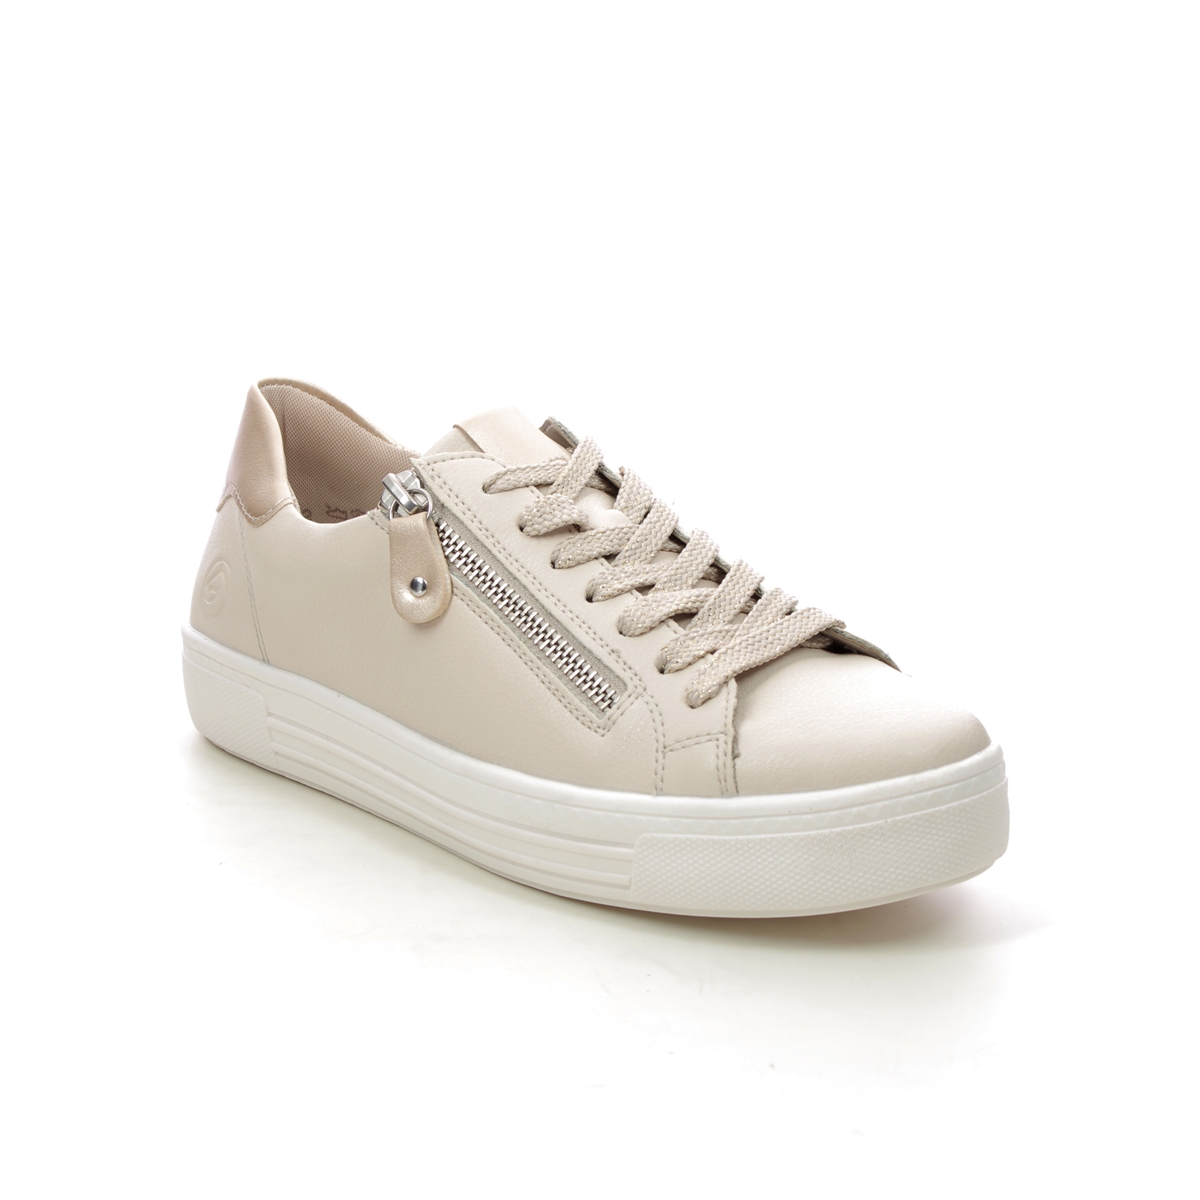 Remonte Altozip Beige Leather Womens Trainers D0903-61 In Size 41 In Plain Beige Leather